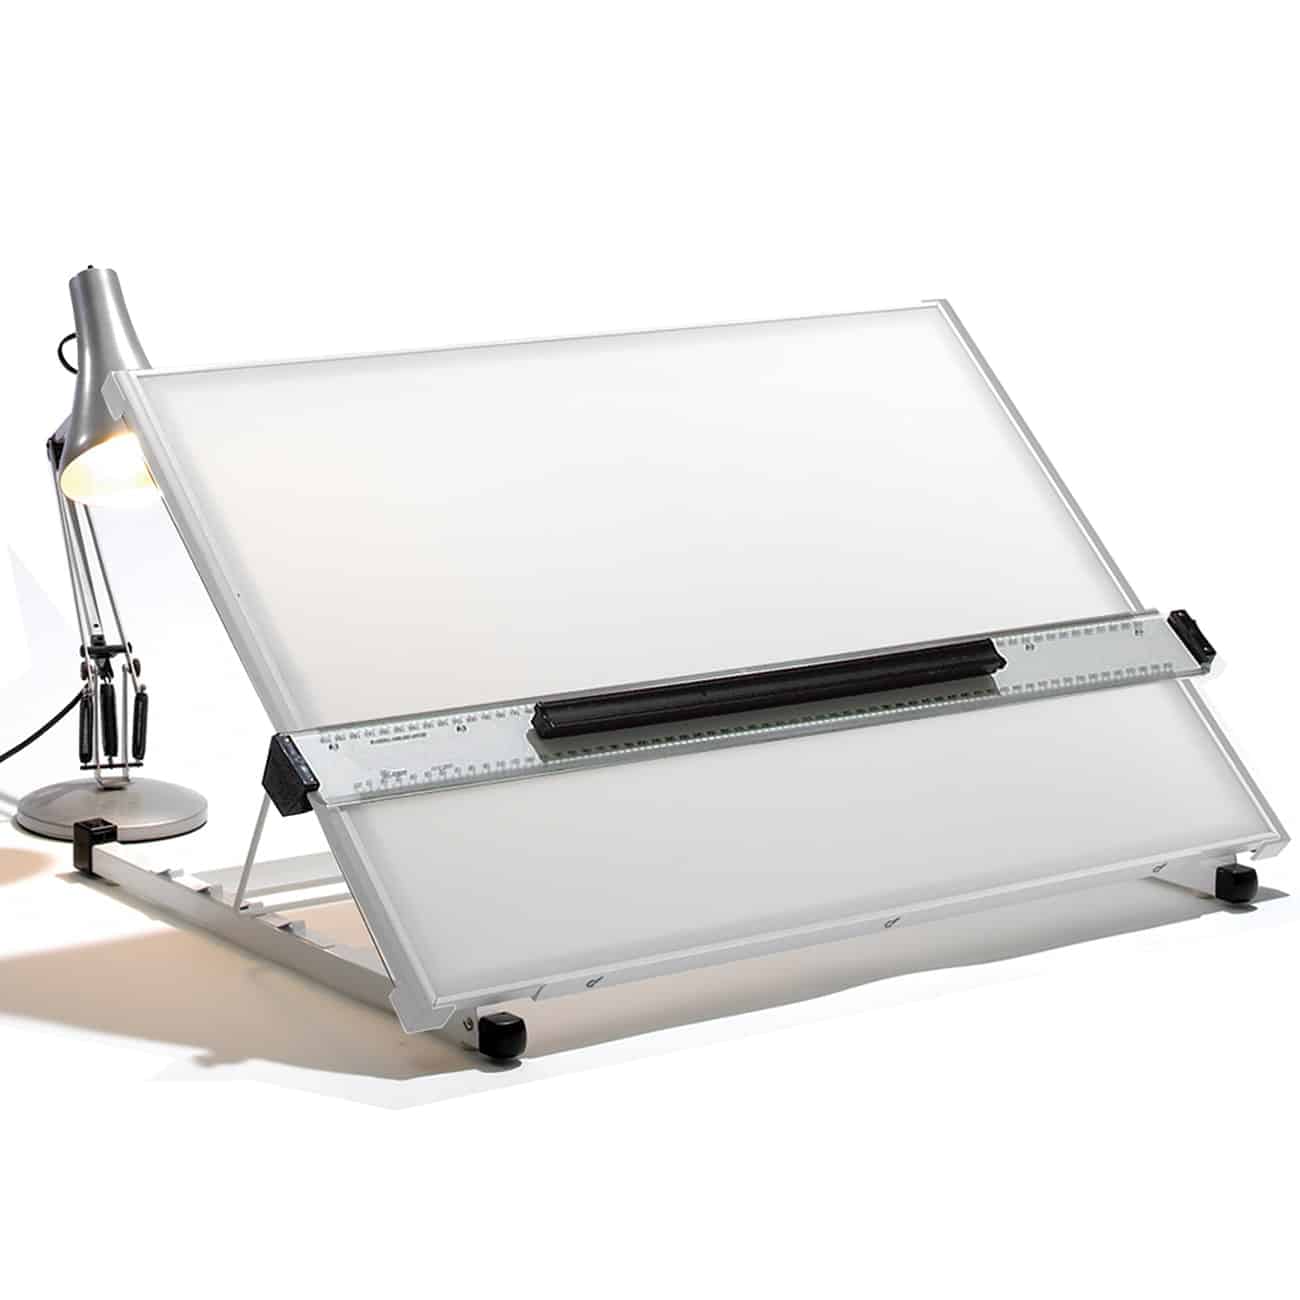 Champion Drawing Board - Blundell Harling